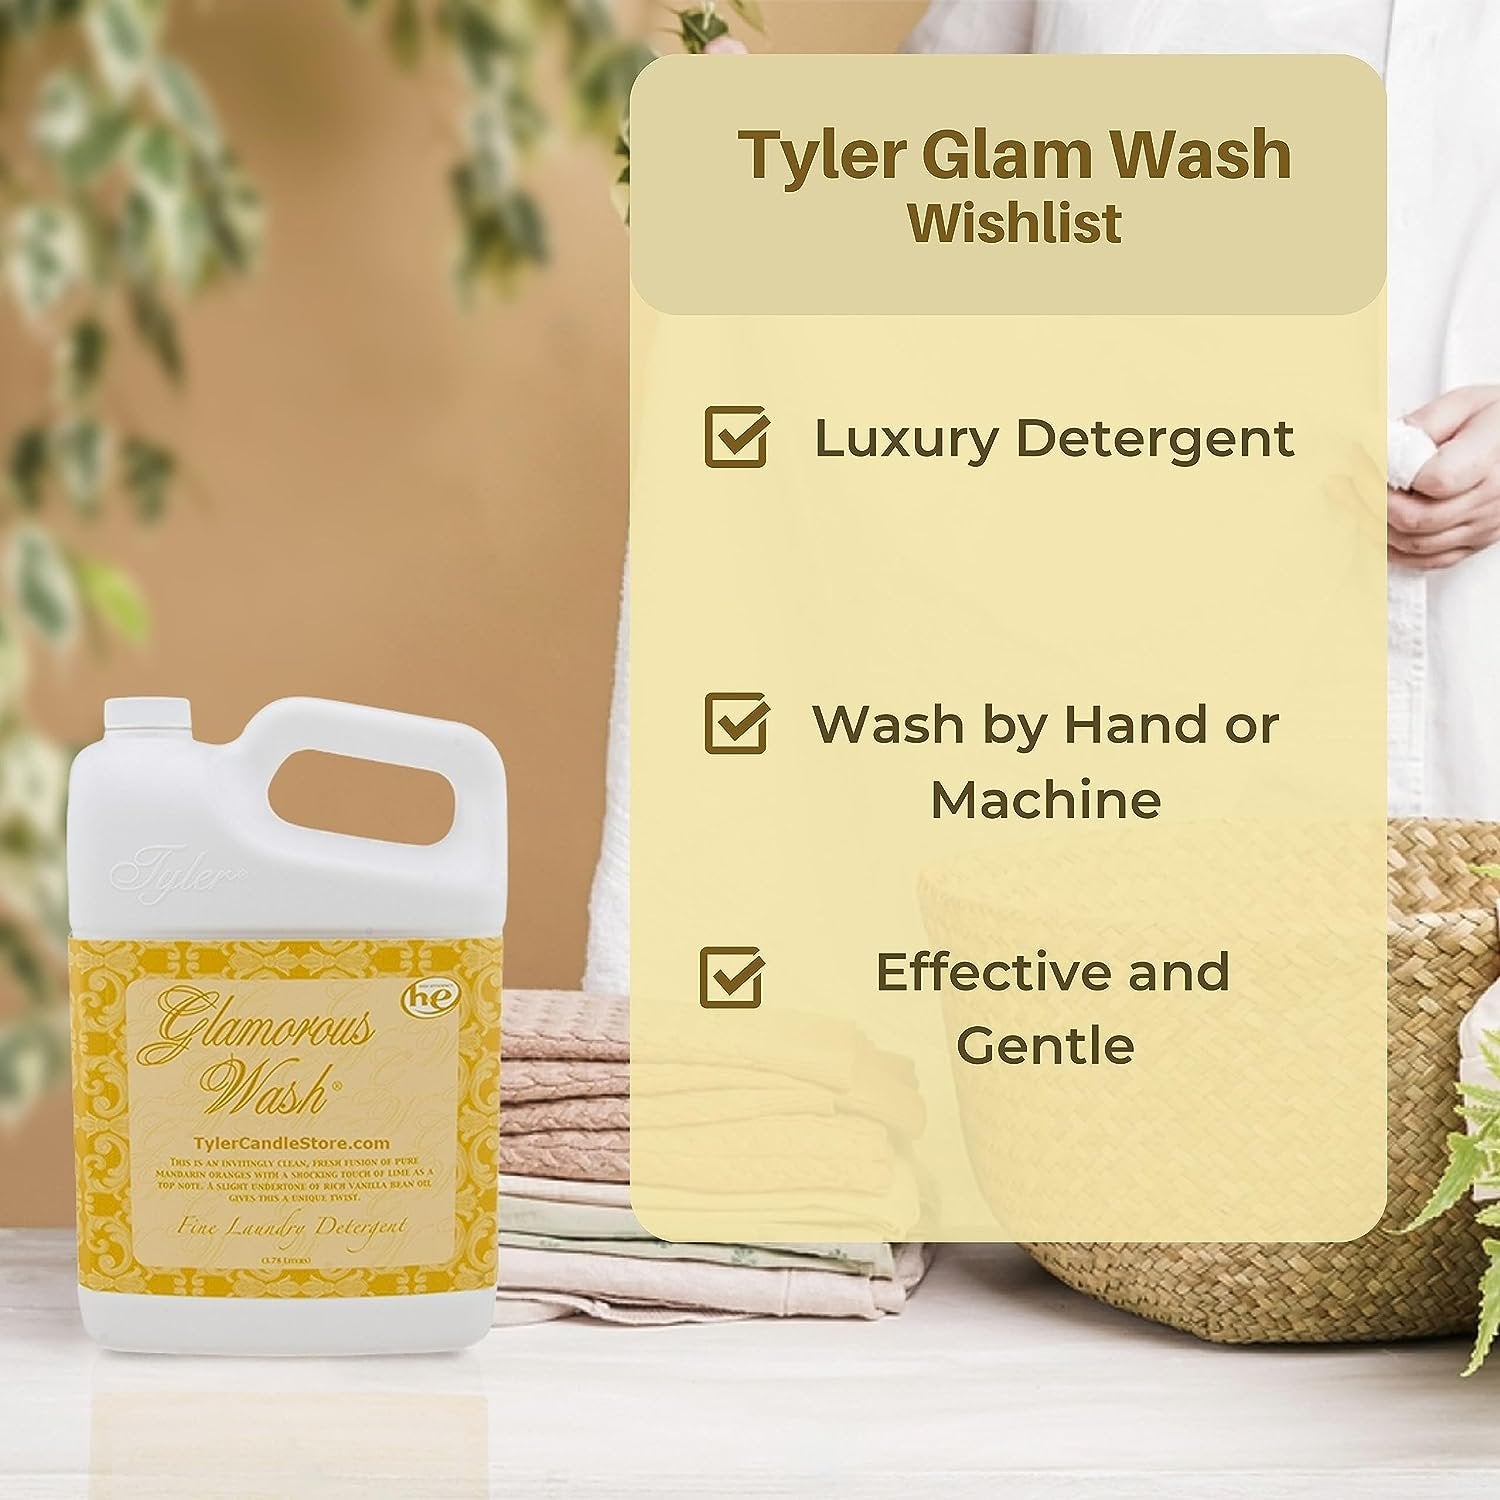 Worldwide Nutrition Bundle, 2 Items: Tyler Glamorous Wash Wishlist Scent Fine Laundry Liquid Detergent - Hand and Machine Washable - 3.78L (1Gallon) Container and Multi-Purpose Key Chain